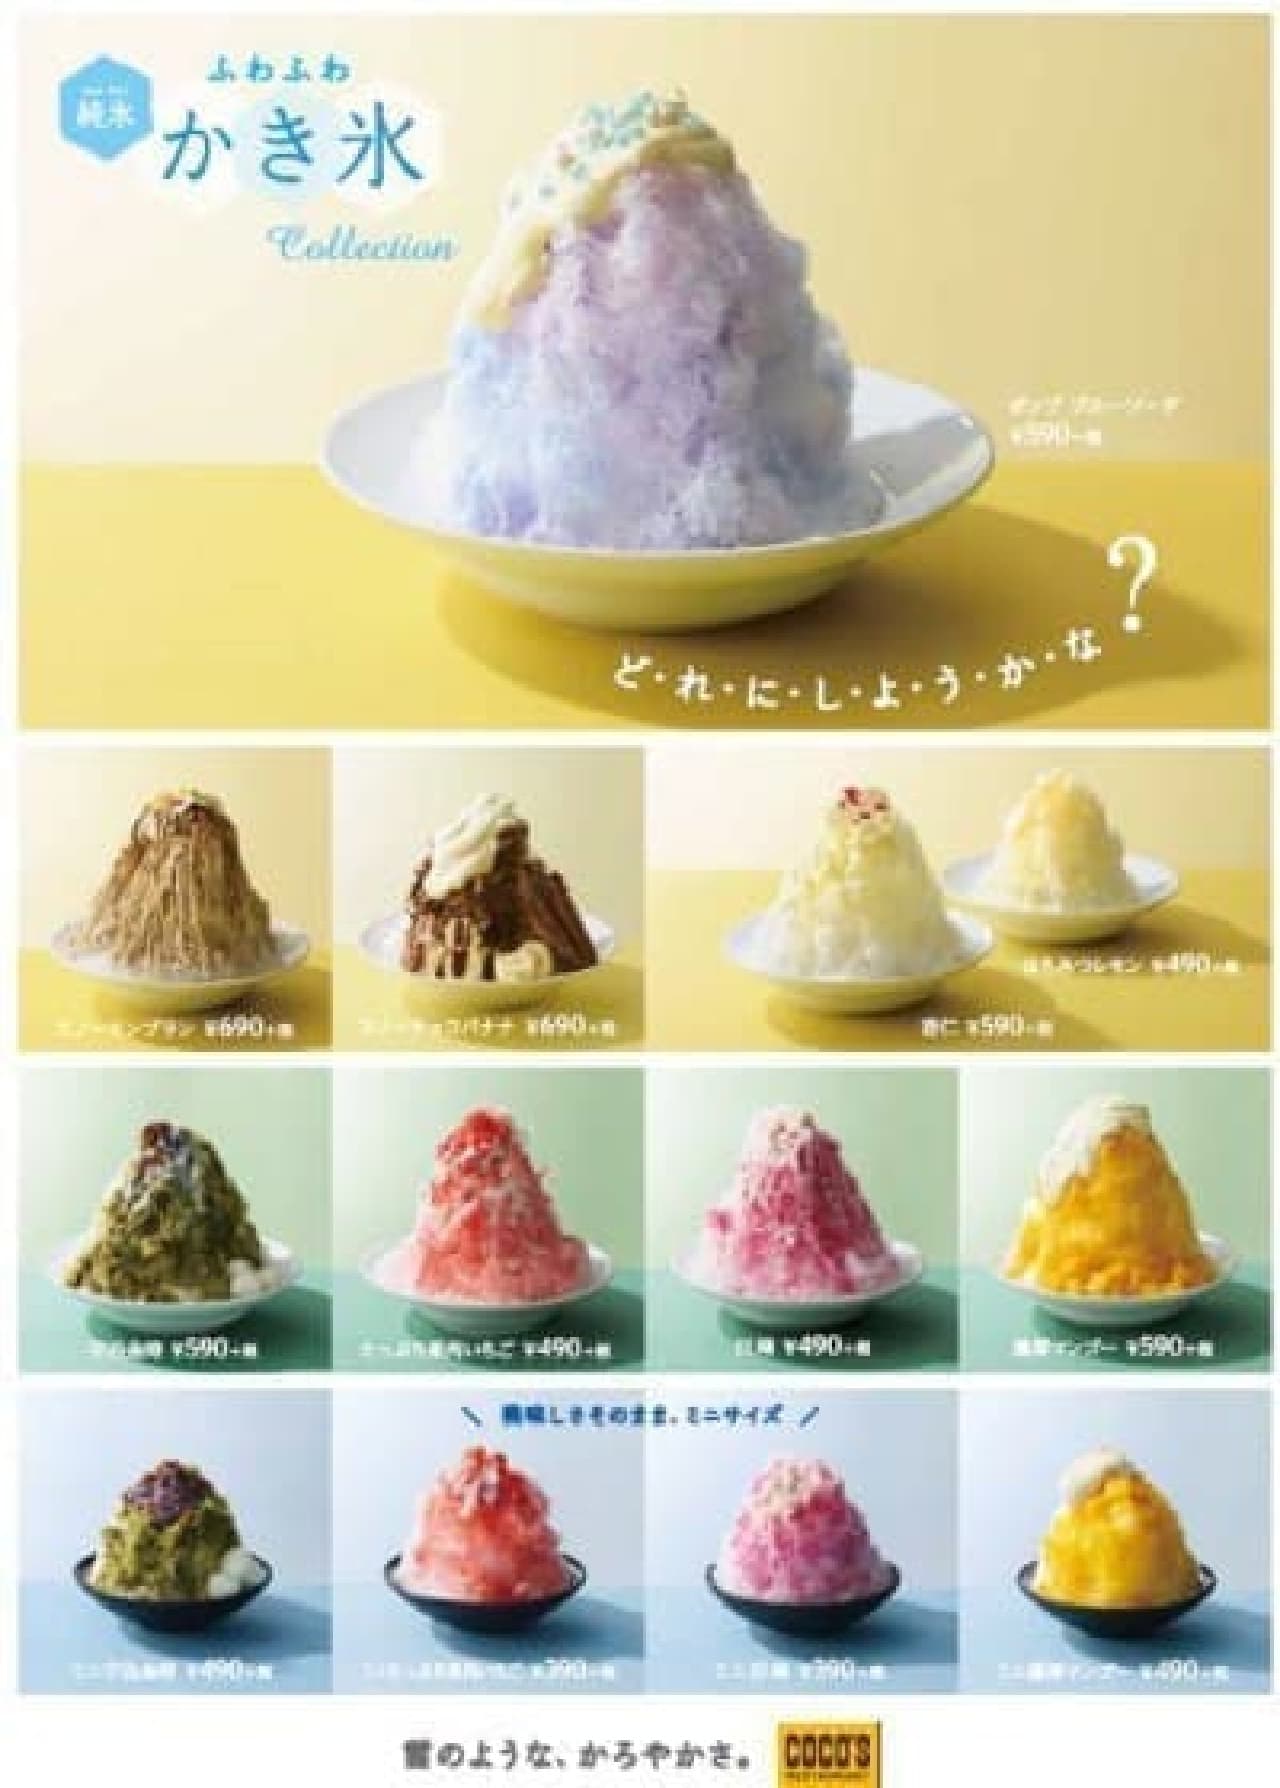 Original shaved ice using pure ice for Cocos